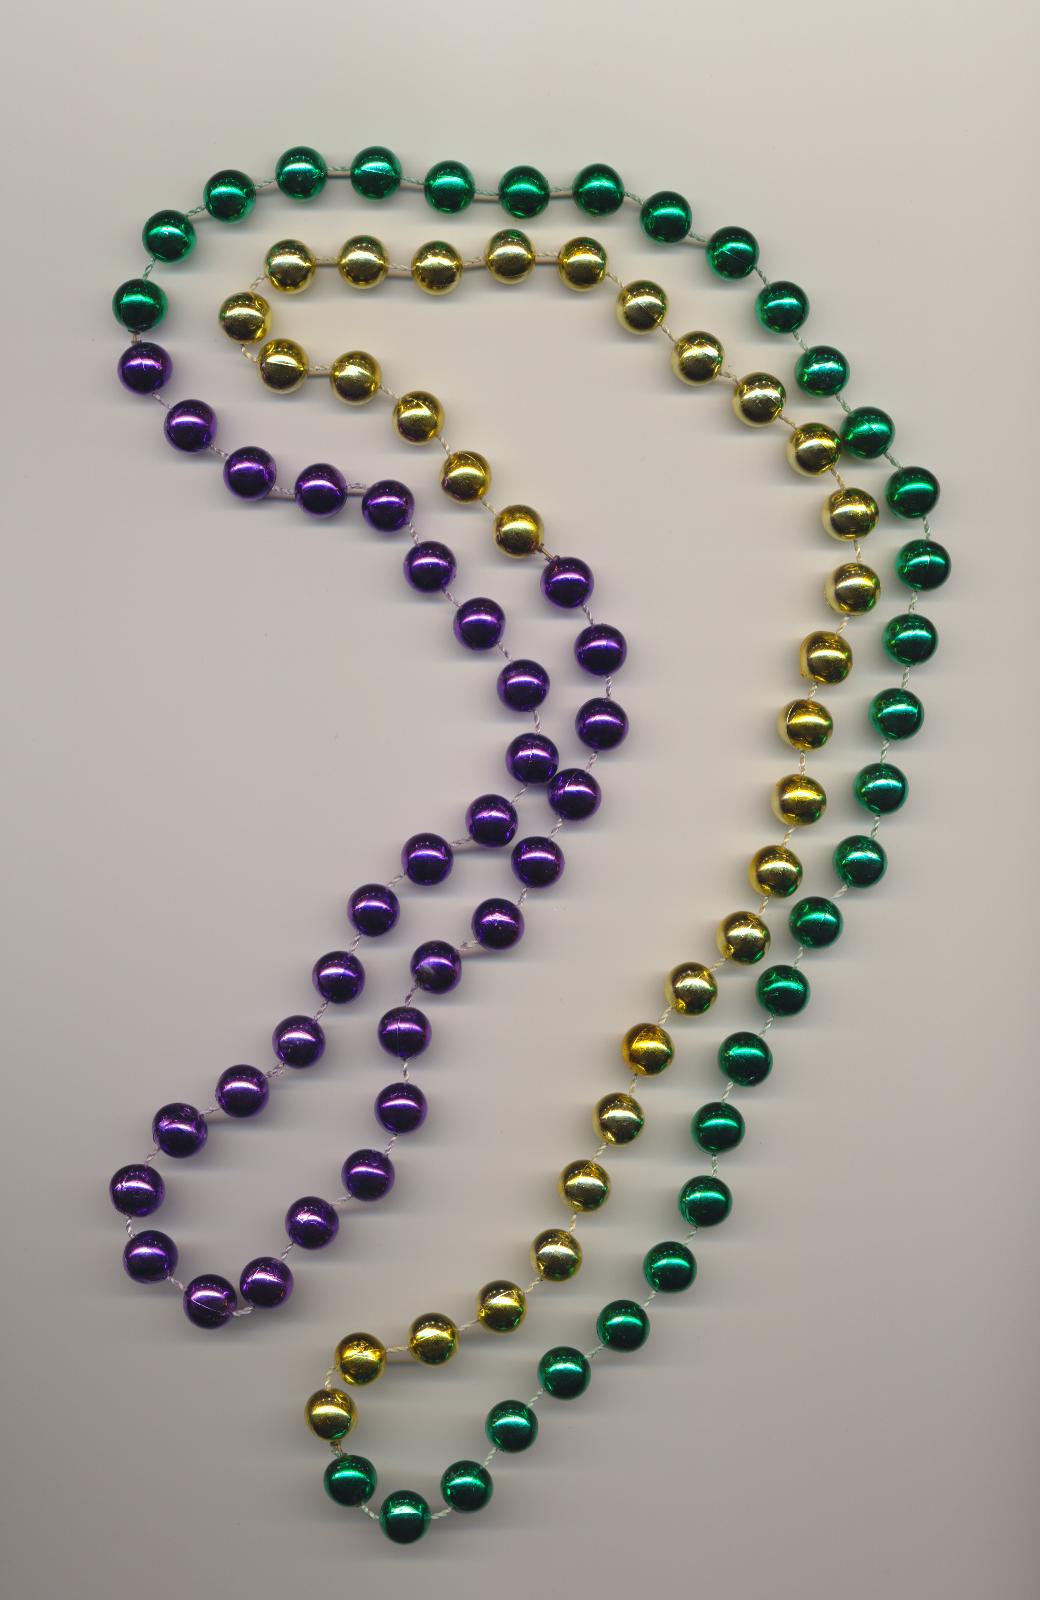 Plastic imitation bead necklace in the traditional Mardi Gras colors of purple, green and gold, Mardi Gras Parade 1996, New Orleans, length 49'' 124cm.